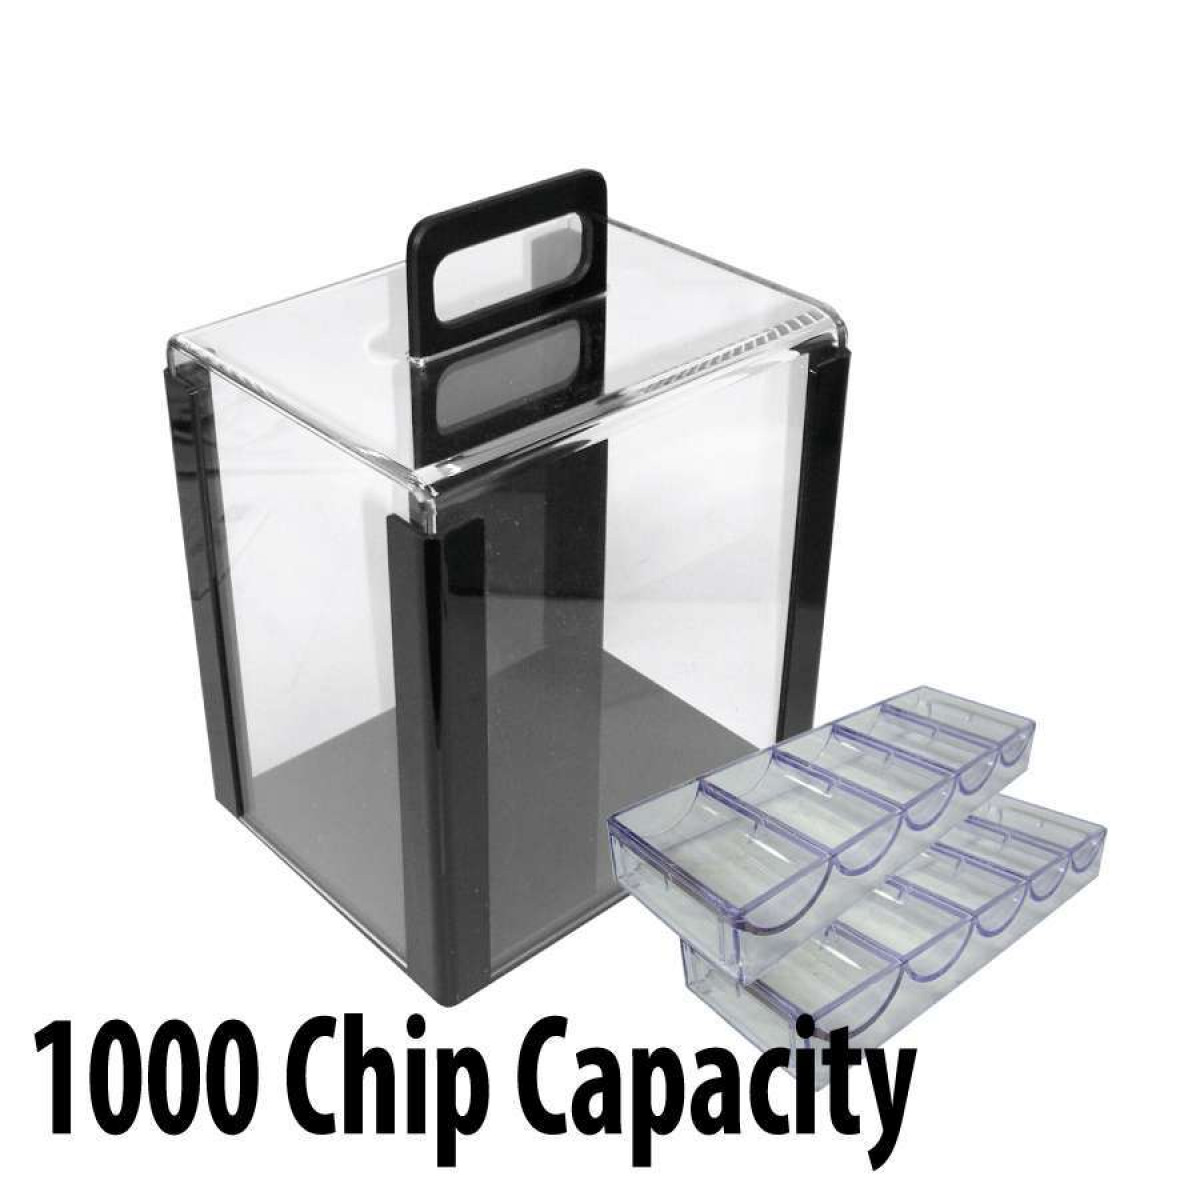 Chip Carrier w/10 Chip Trays 1,000-Piece Casino Acrylic Poker Chip Case 